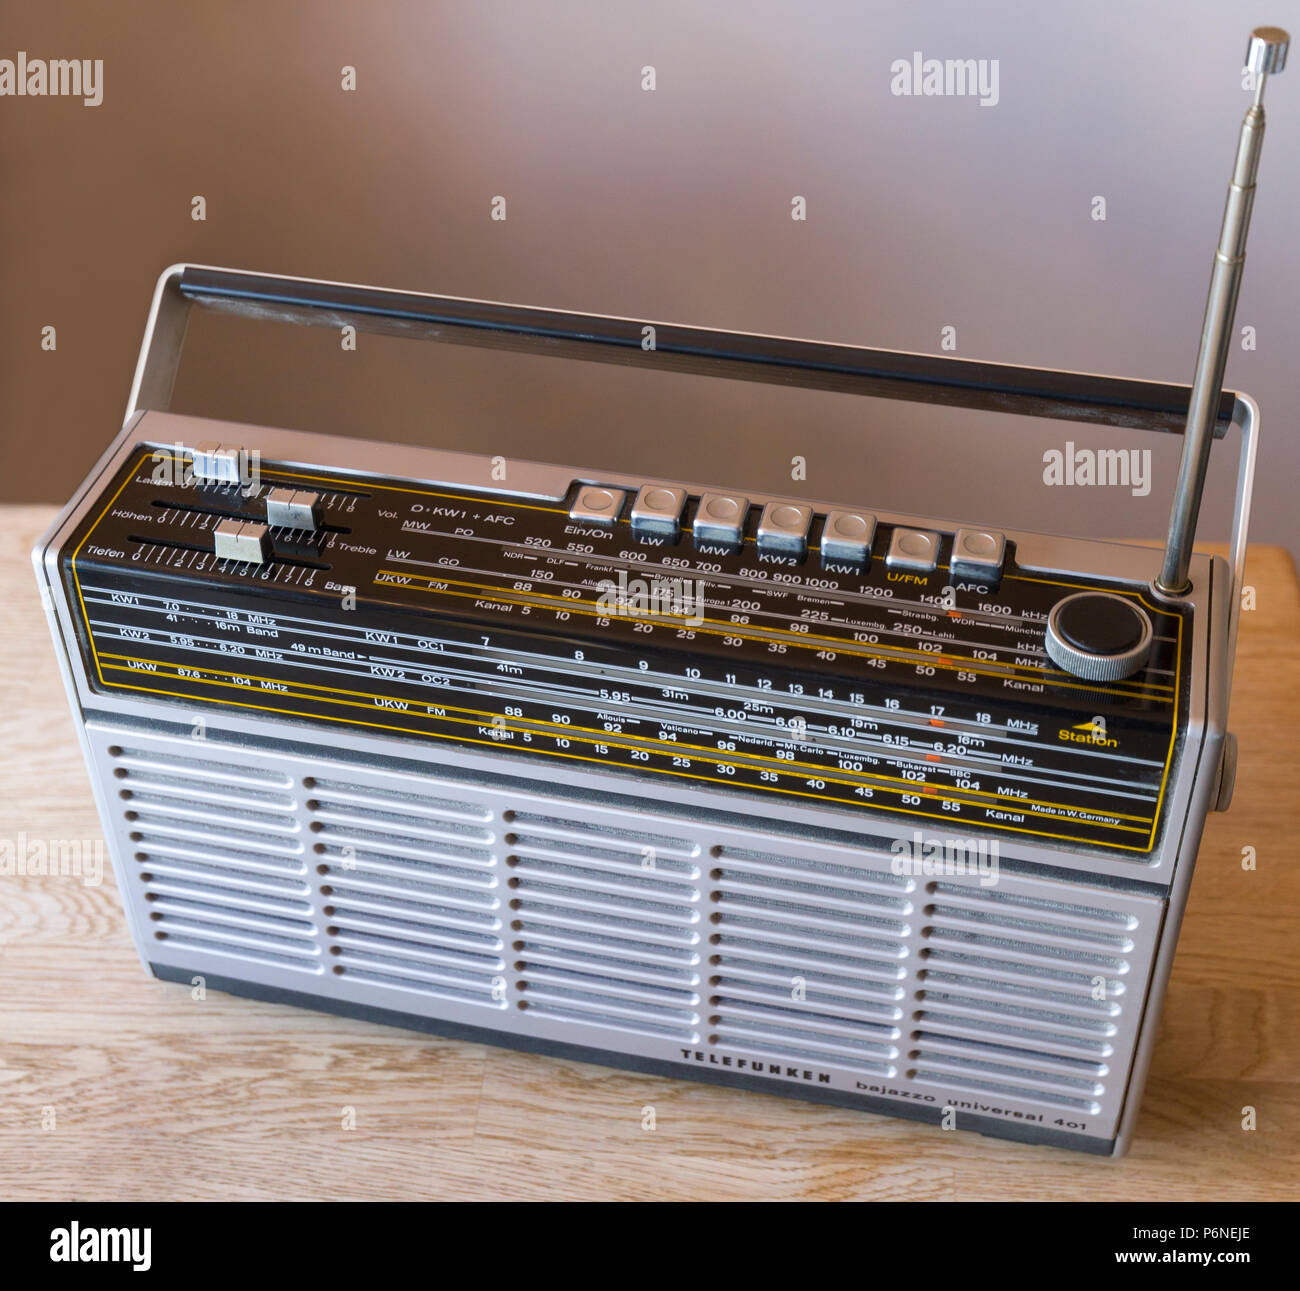 Telefunken Radio High Resolution Stock Photography and Images - Alamy